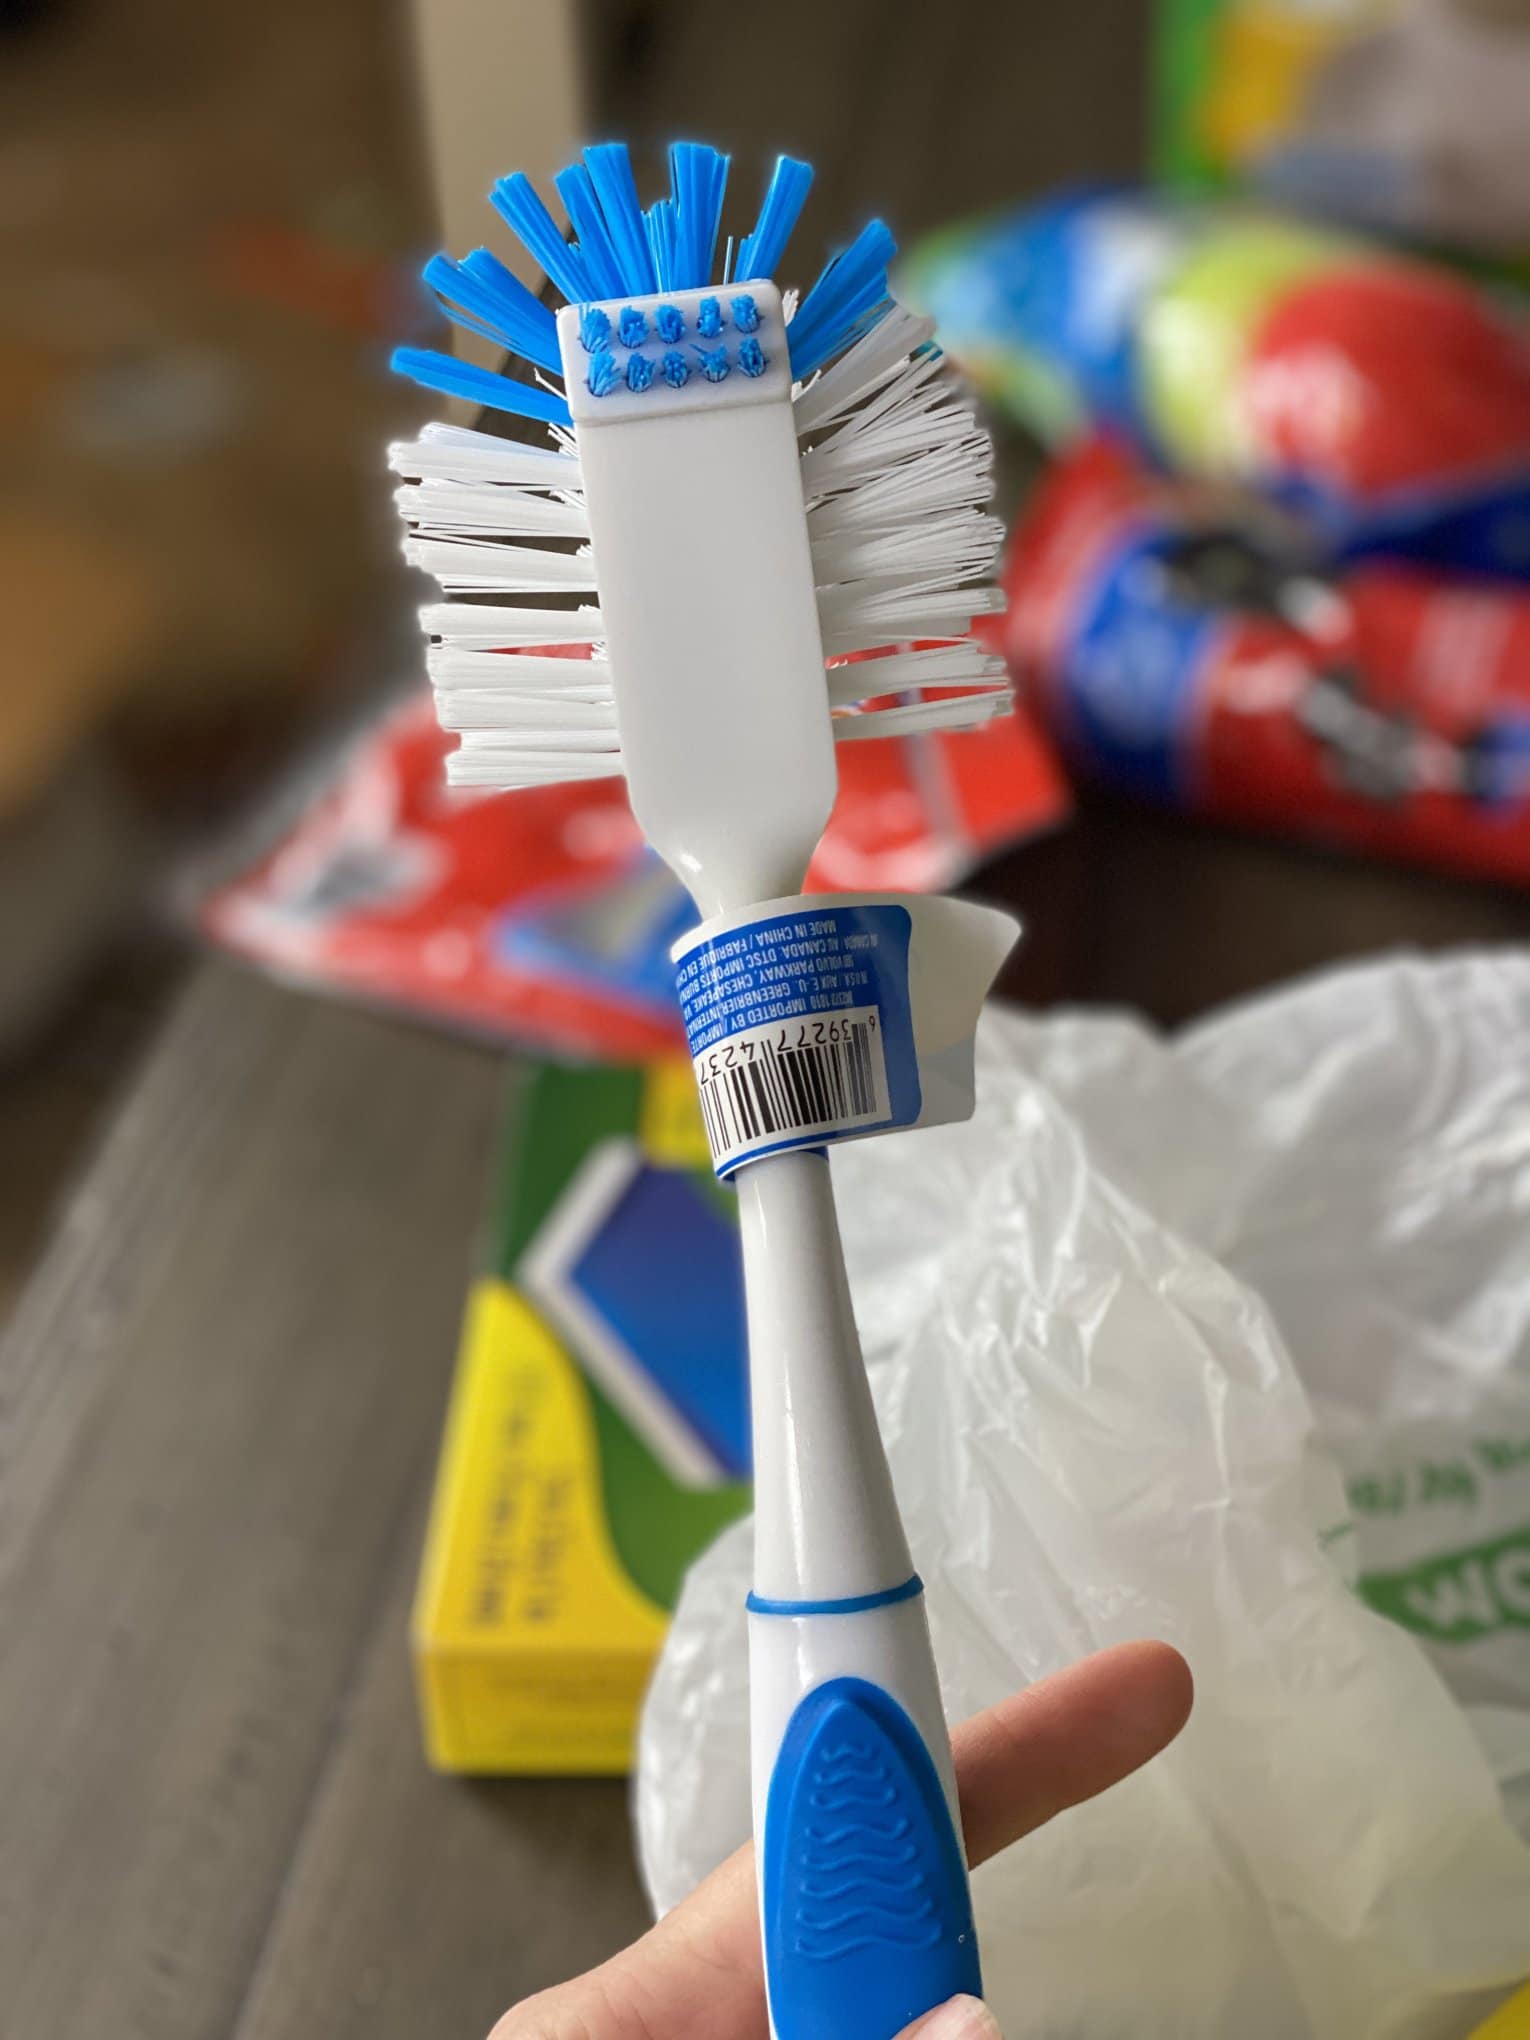 25+ Must Buy Dollar Tree Cleaning Supplies - Clarks Condensed